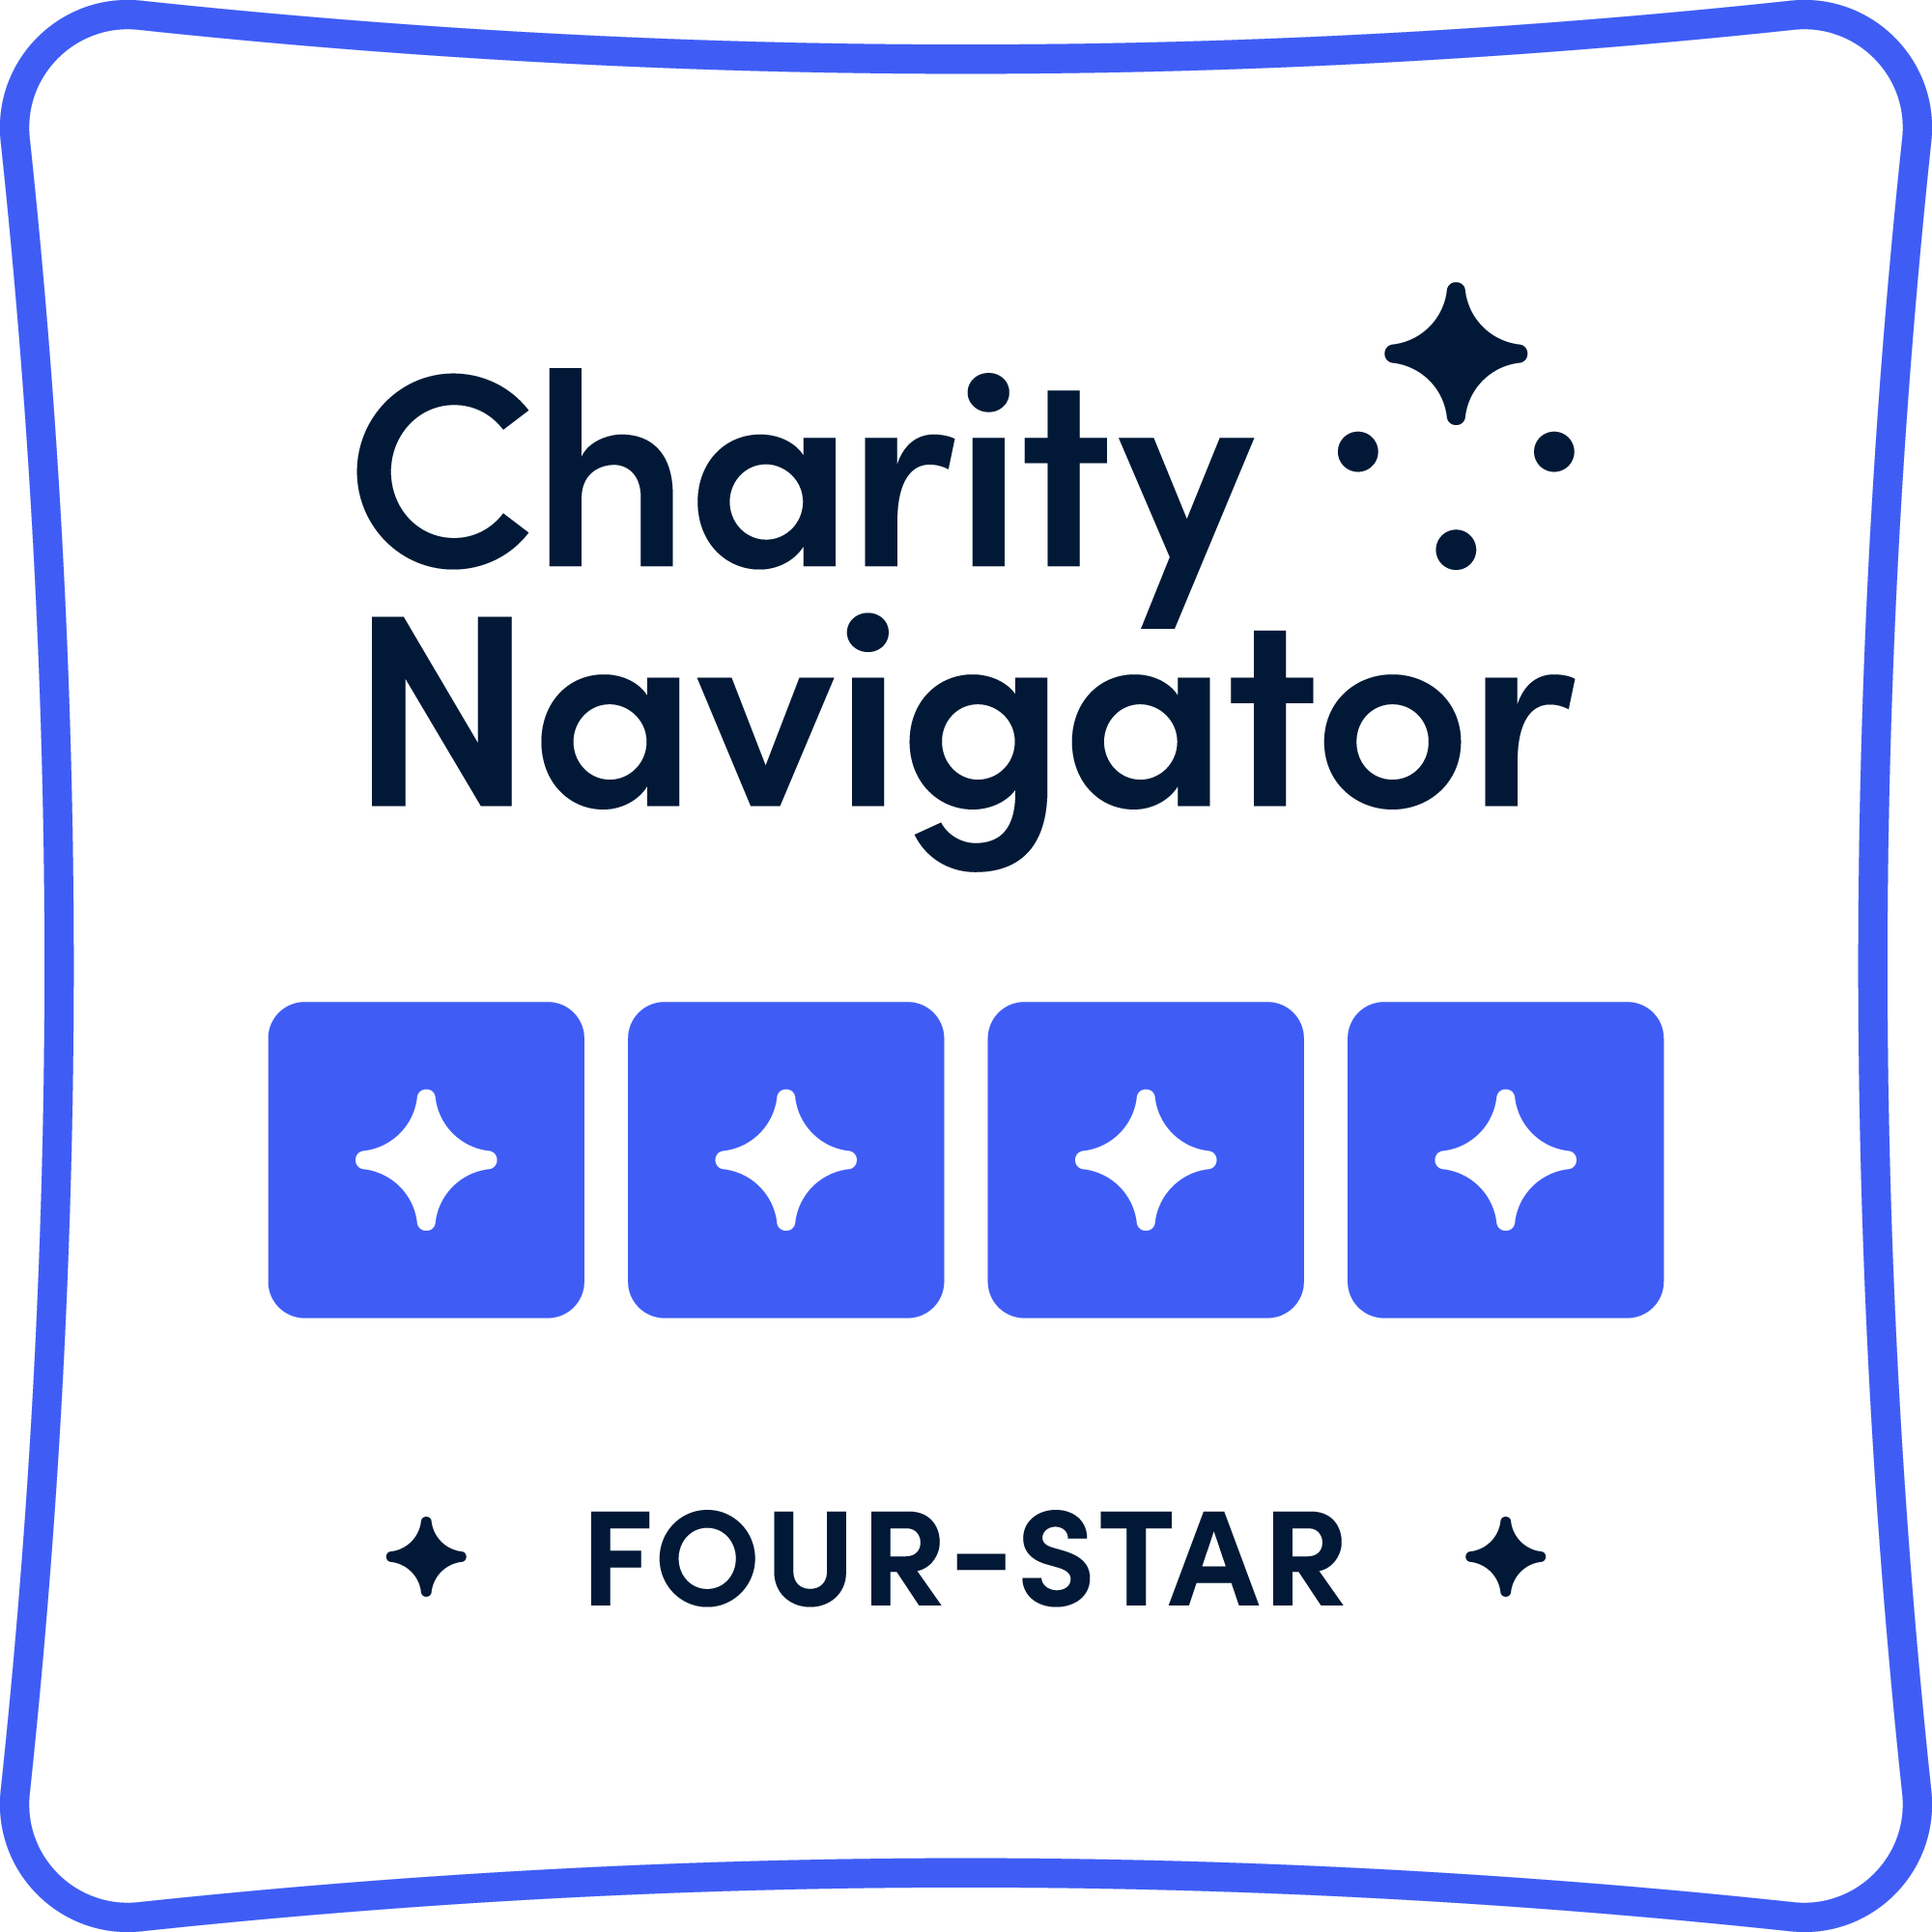 Charity Navigator rating: 88/100 - Give with confidence